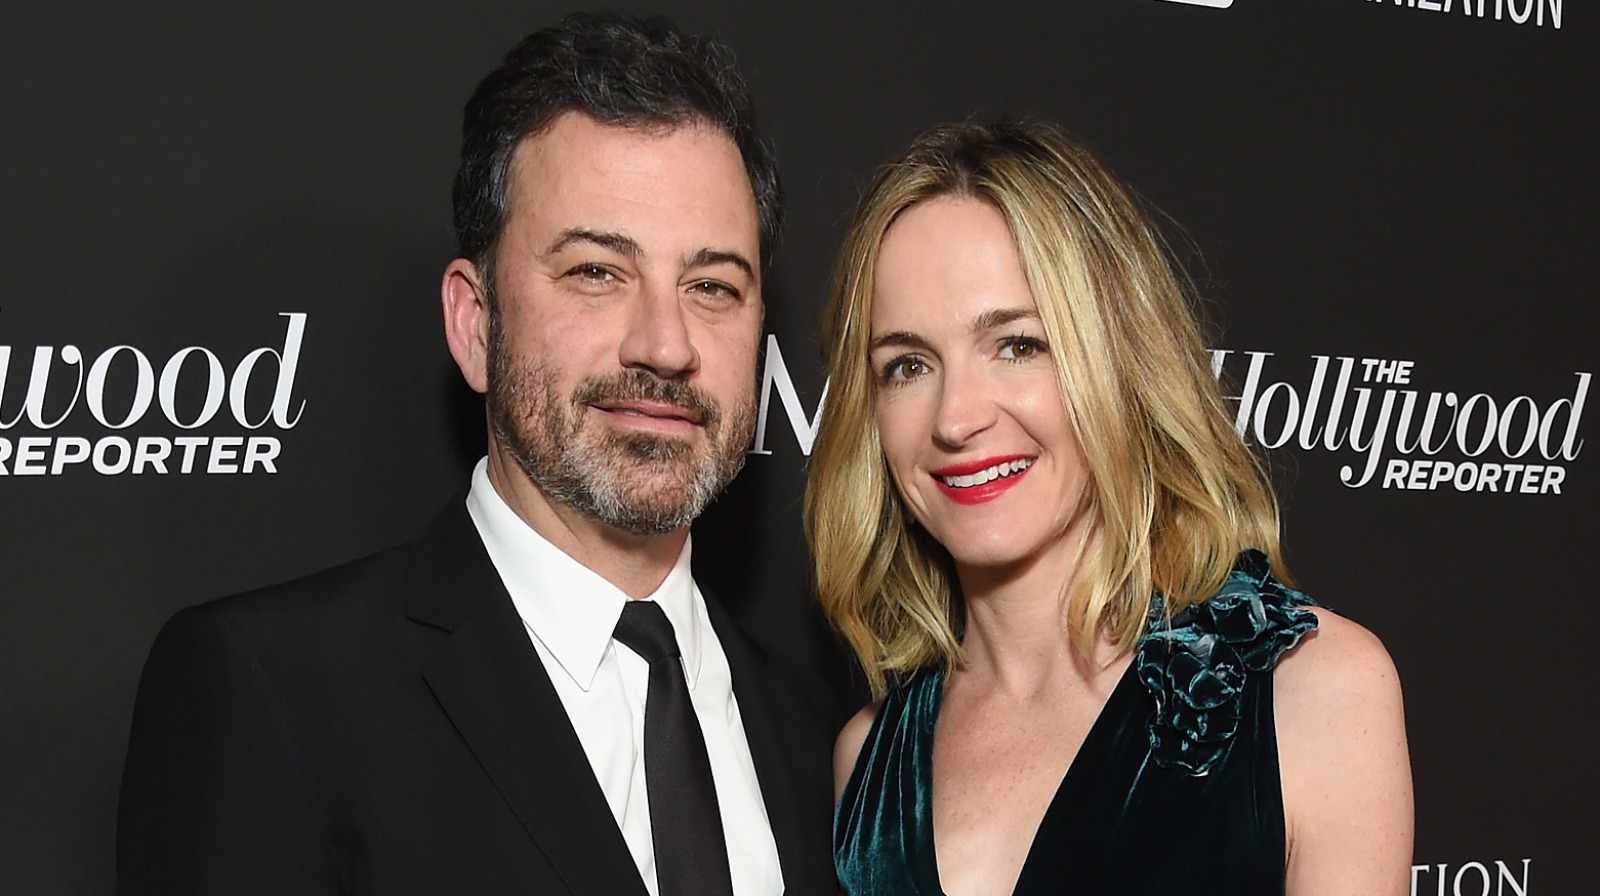 What you don't know about Jimmy Kimmel's wife Molly McNearney